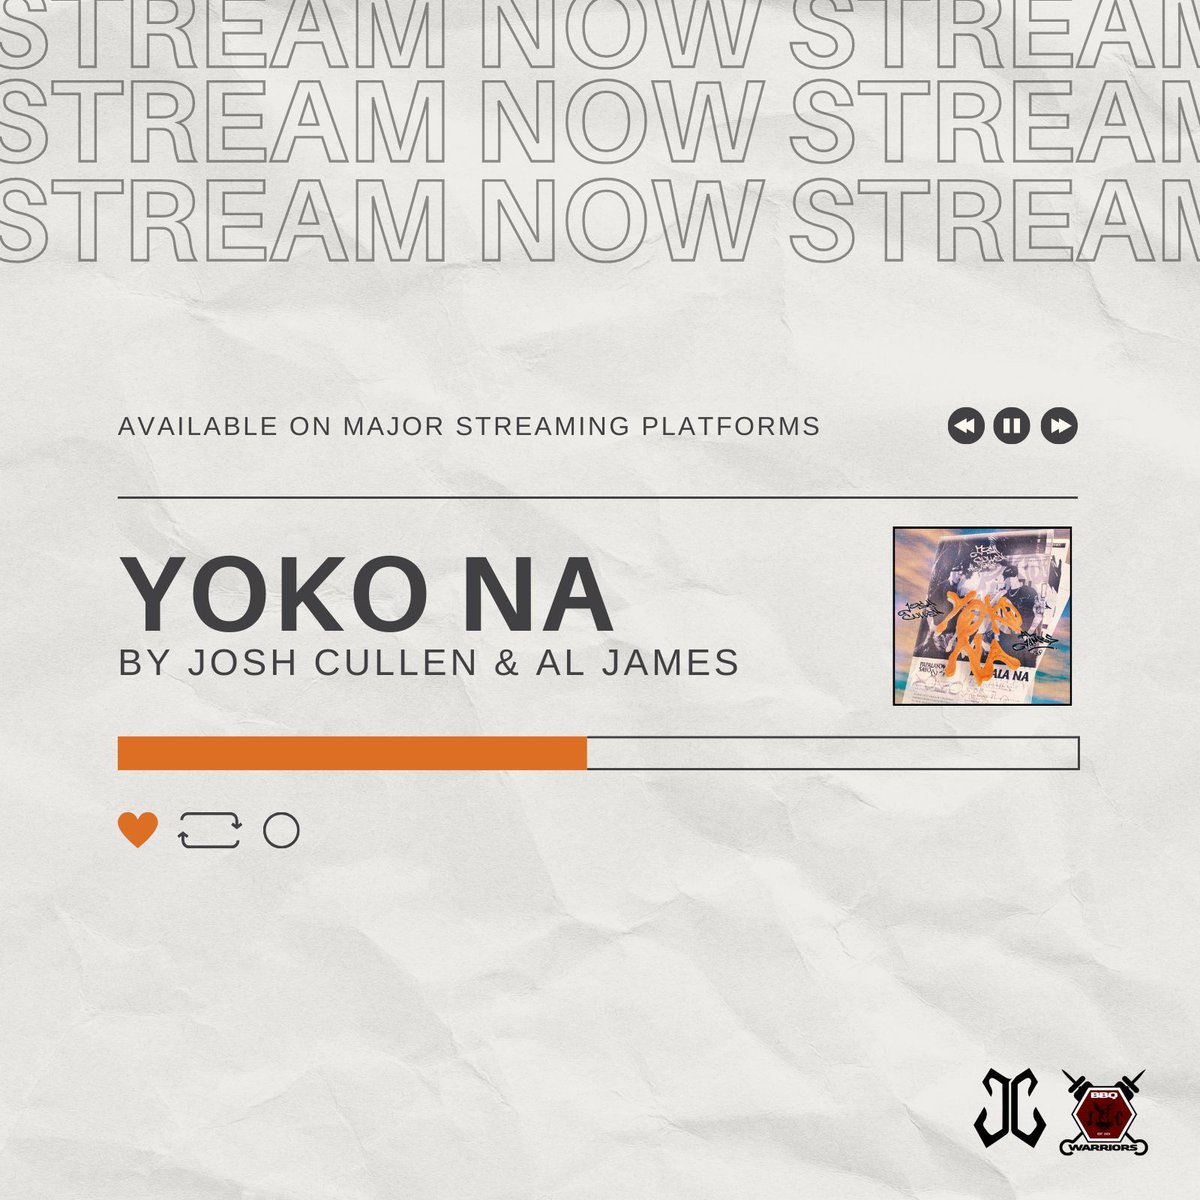 MAKE IT A HABIT: Listen to #YokoNa by #JOSHCULLEN, listen to 1-2 songs in the same Spotify Playlist, go back to Yoko Na as listed below, then drop a link here after!

🔗 buff.ly/3J7fcaw  
🔗 buff.ly/3U4Jy3N 
🔗 buff.ly/4aASYtM